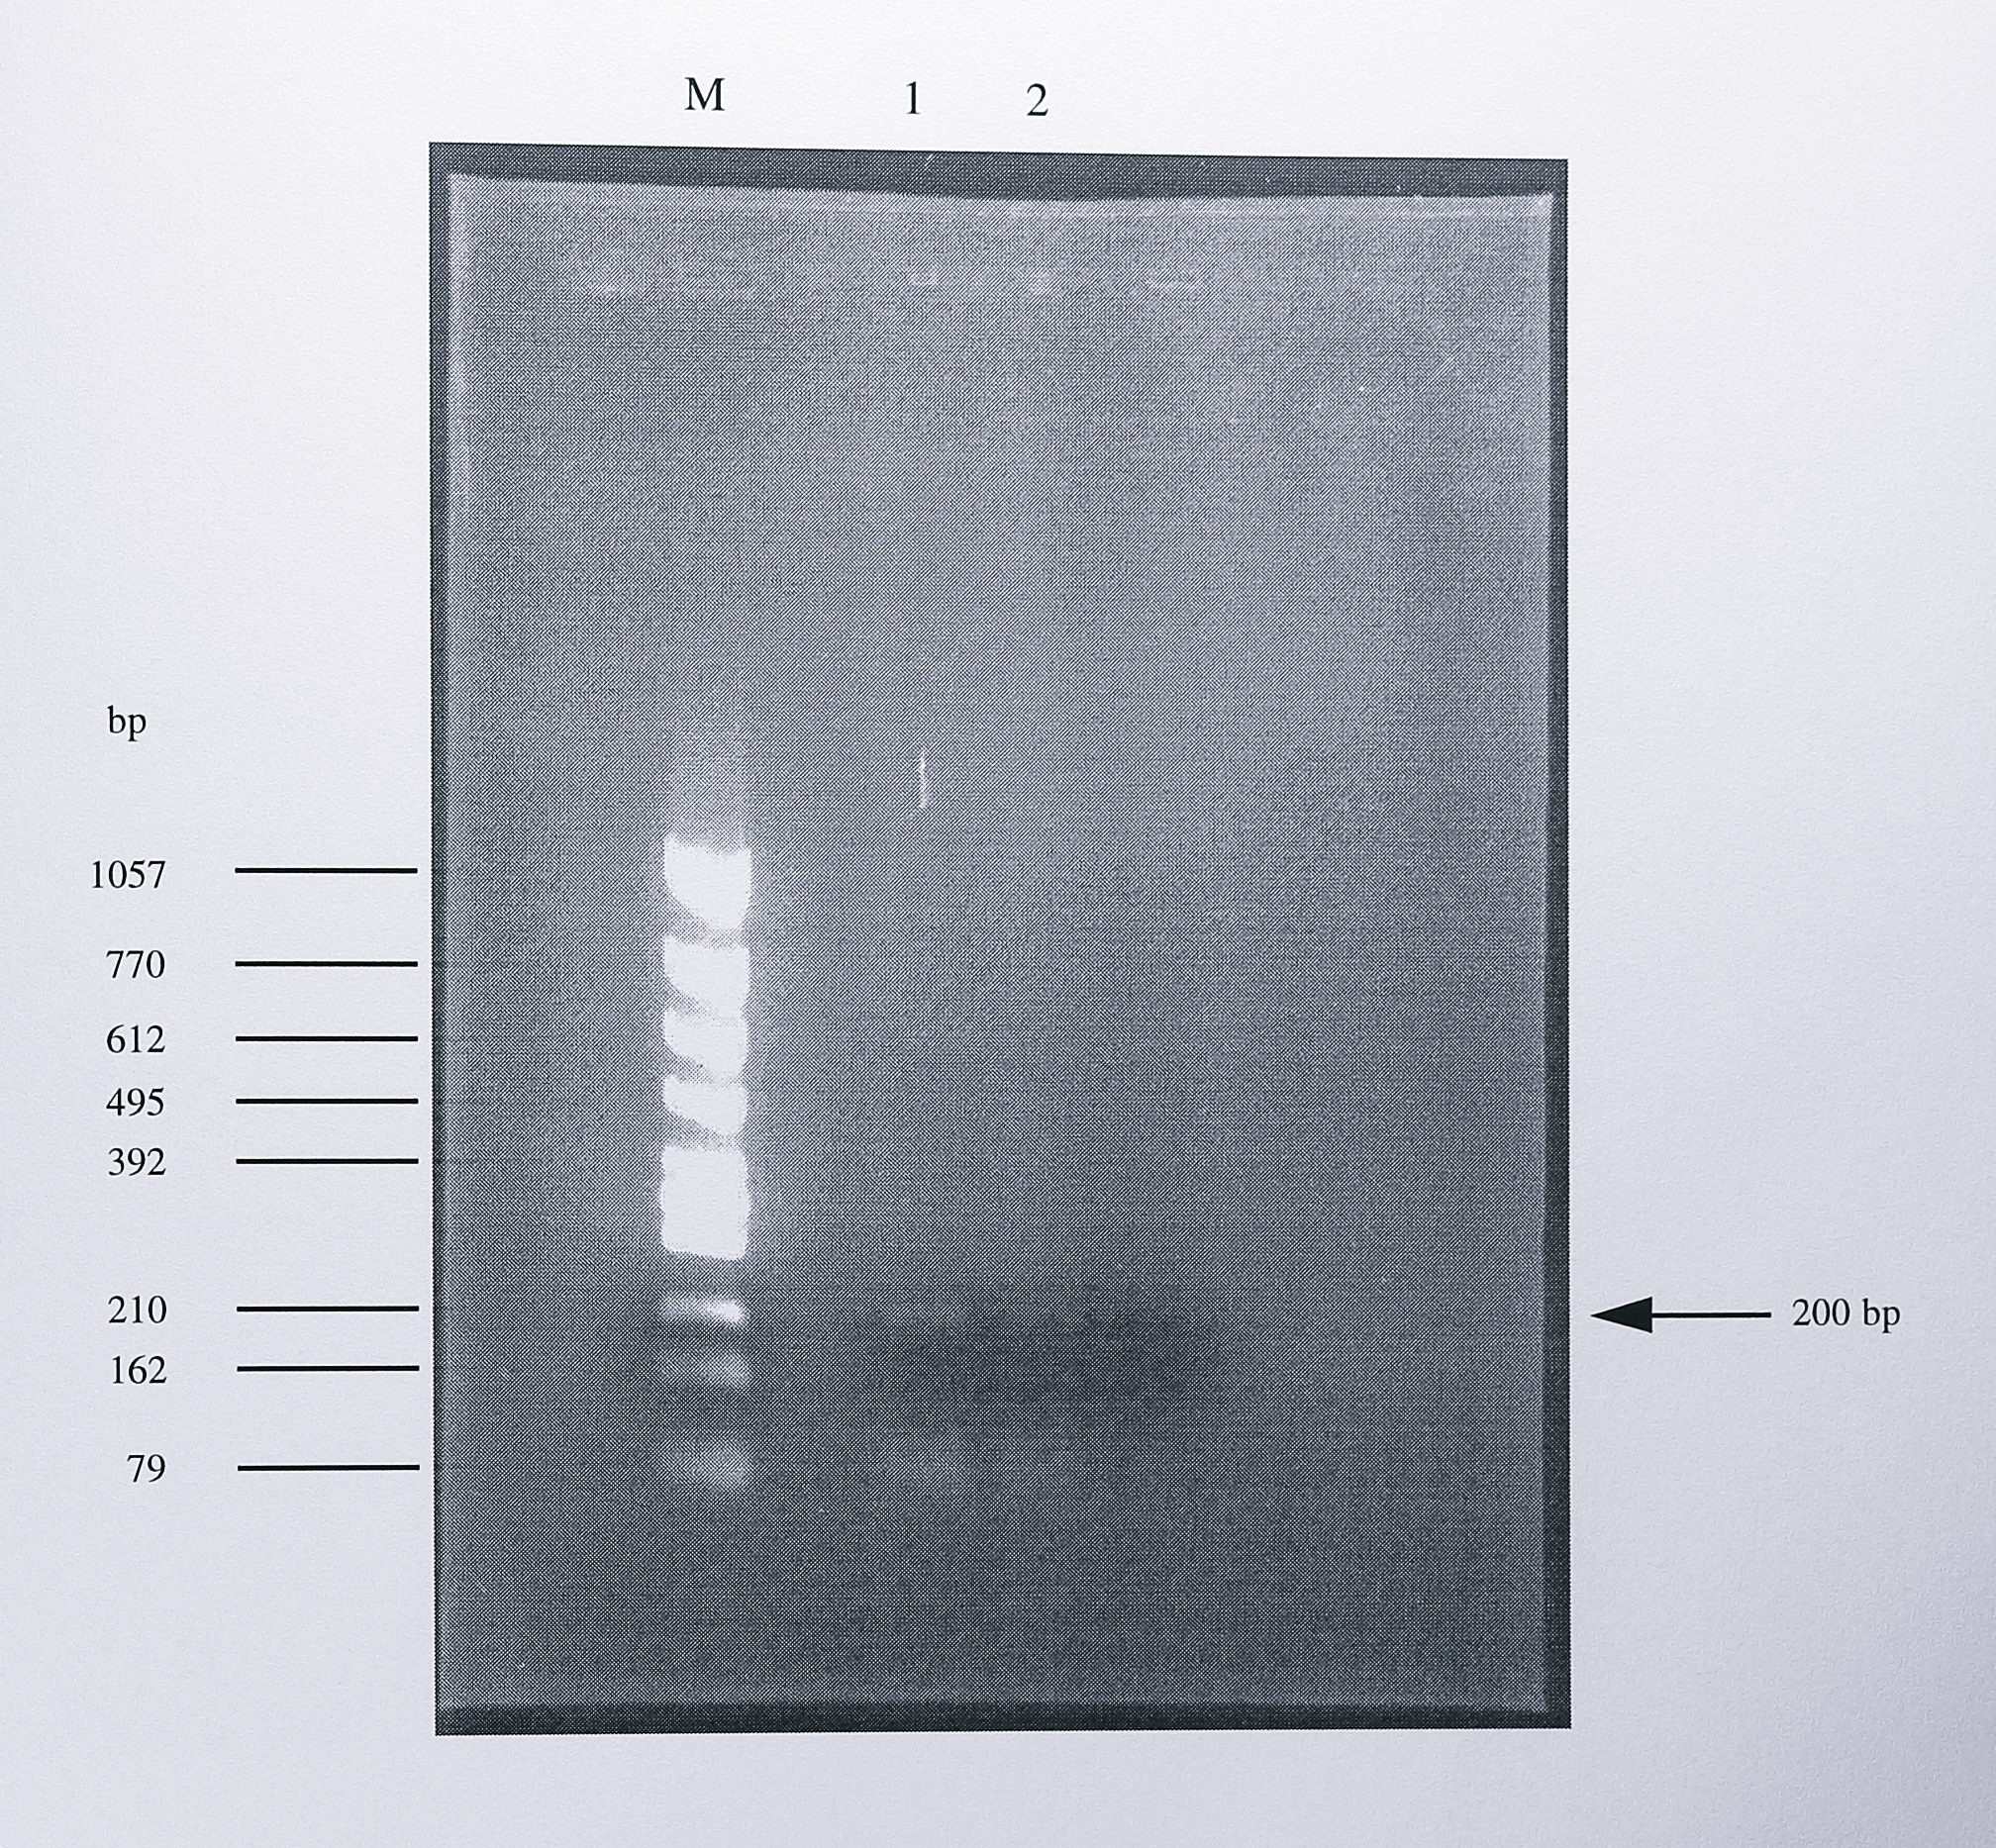 Analysis using agarose gel electrophoresis of the PCR product generated from _nirS_ mRNA by 5'-RACE. Following cDNA synthesis using the primer 284R (Figure 7.4) and the addition of a poly-A tail to the cDNA product, three PCR reactions were performed using the primer pairs QTF + 284R, QOF + 242R and Q1F + 228R (see Figure 7.7). 10 $\mu$l of the final PCR reaction were separated by electrophoresis on a 1.2% agarose gel. Lanes 1 and 2 show a single PCR product of approximately 200 bp in length. To optimise the PCR reaction different conditions were used in the last PCR reaction; lane 1 used a high-salt buffer and lane 2 used low-salt buffer. The lane labelled M contains DNA size standards, the sizes of some of which are indicated at the left of the gel.